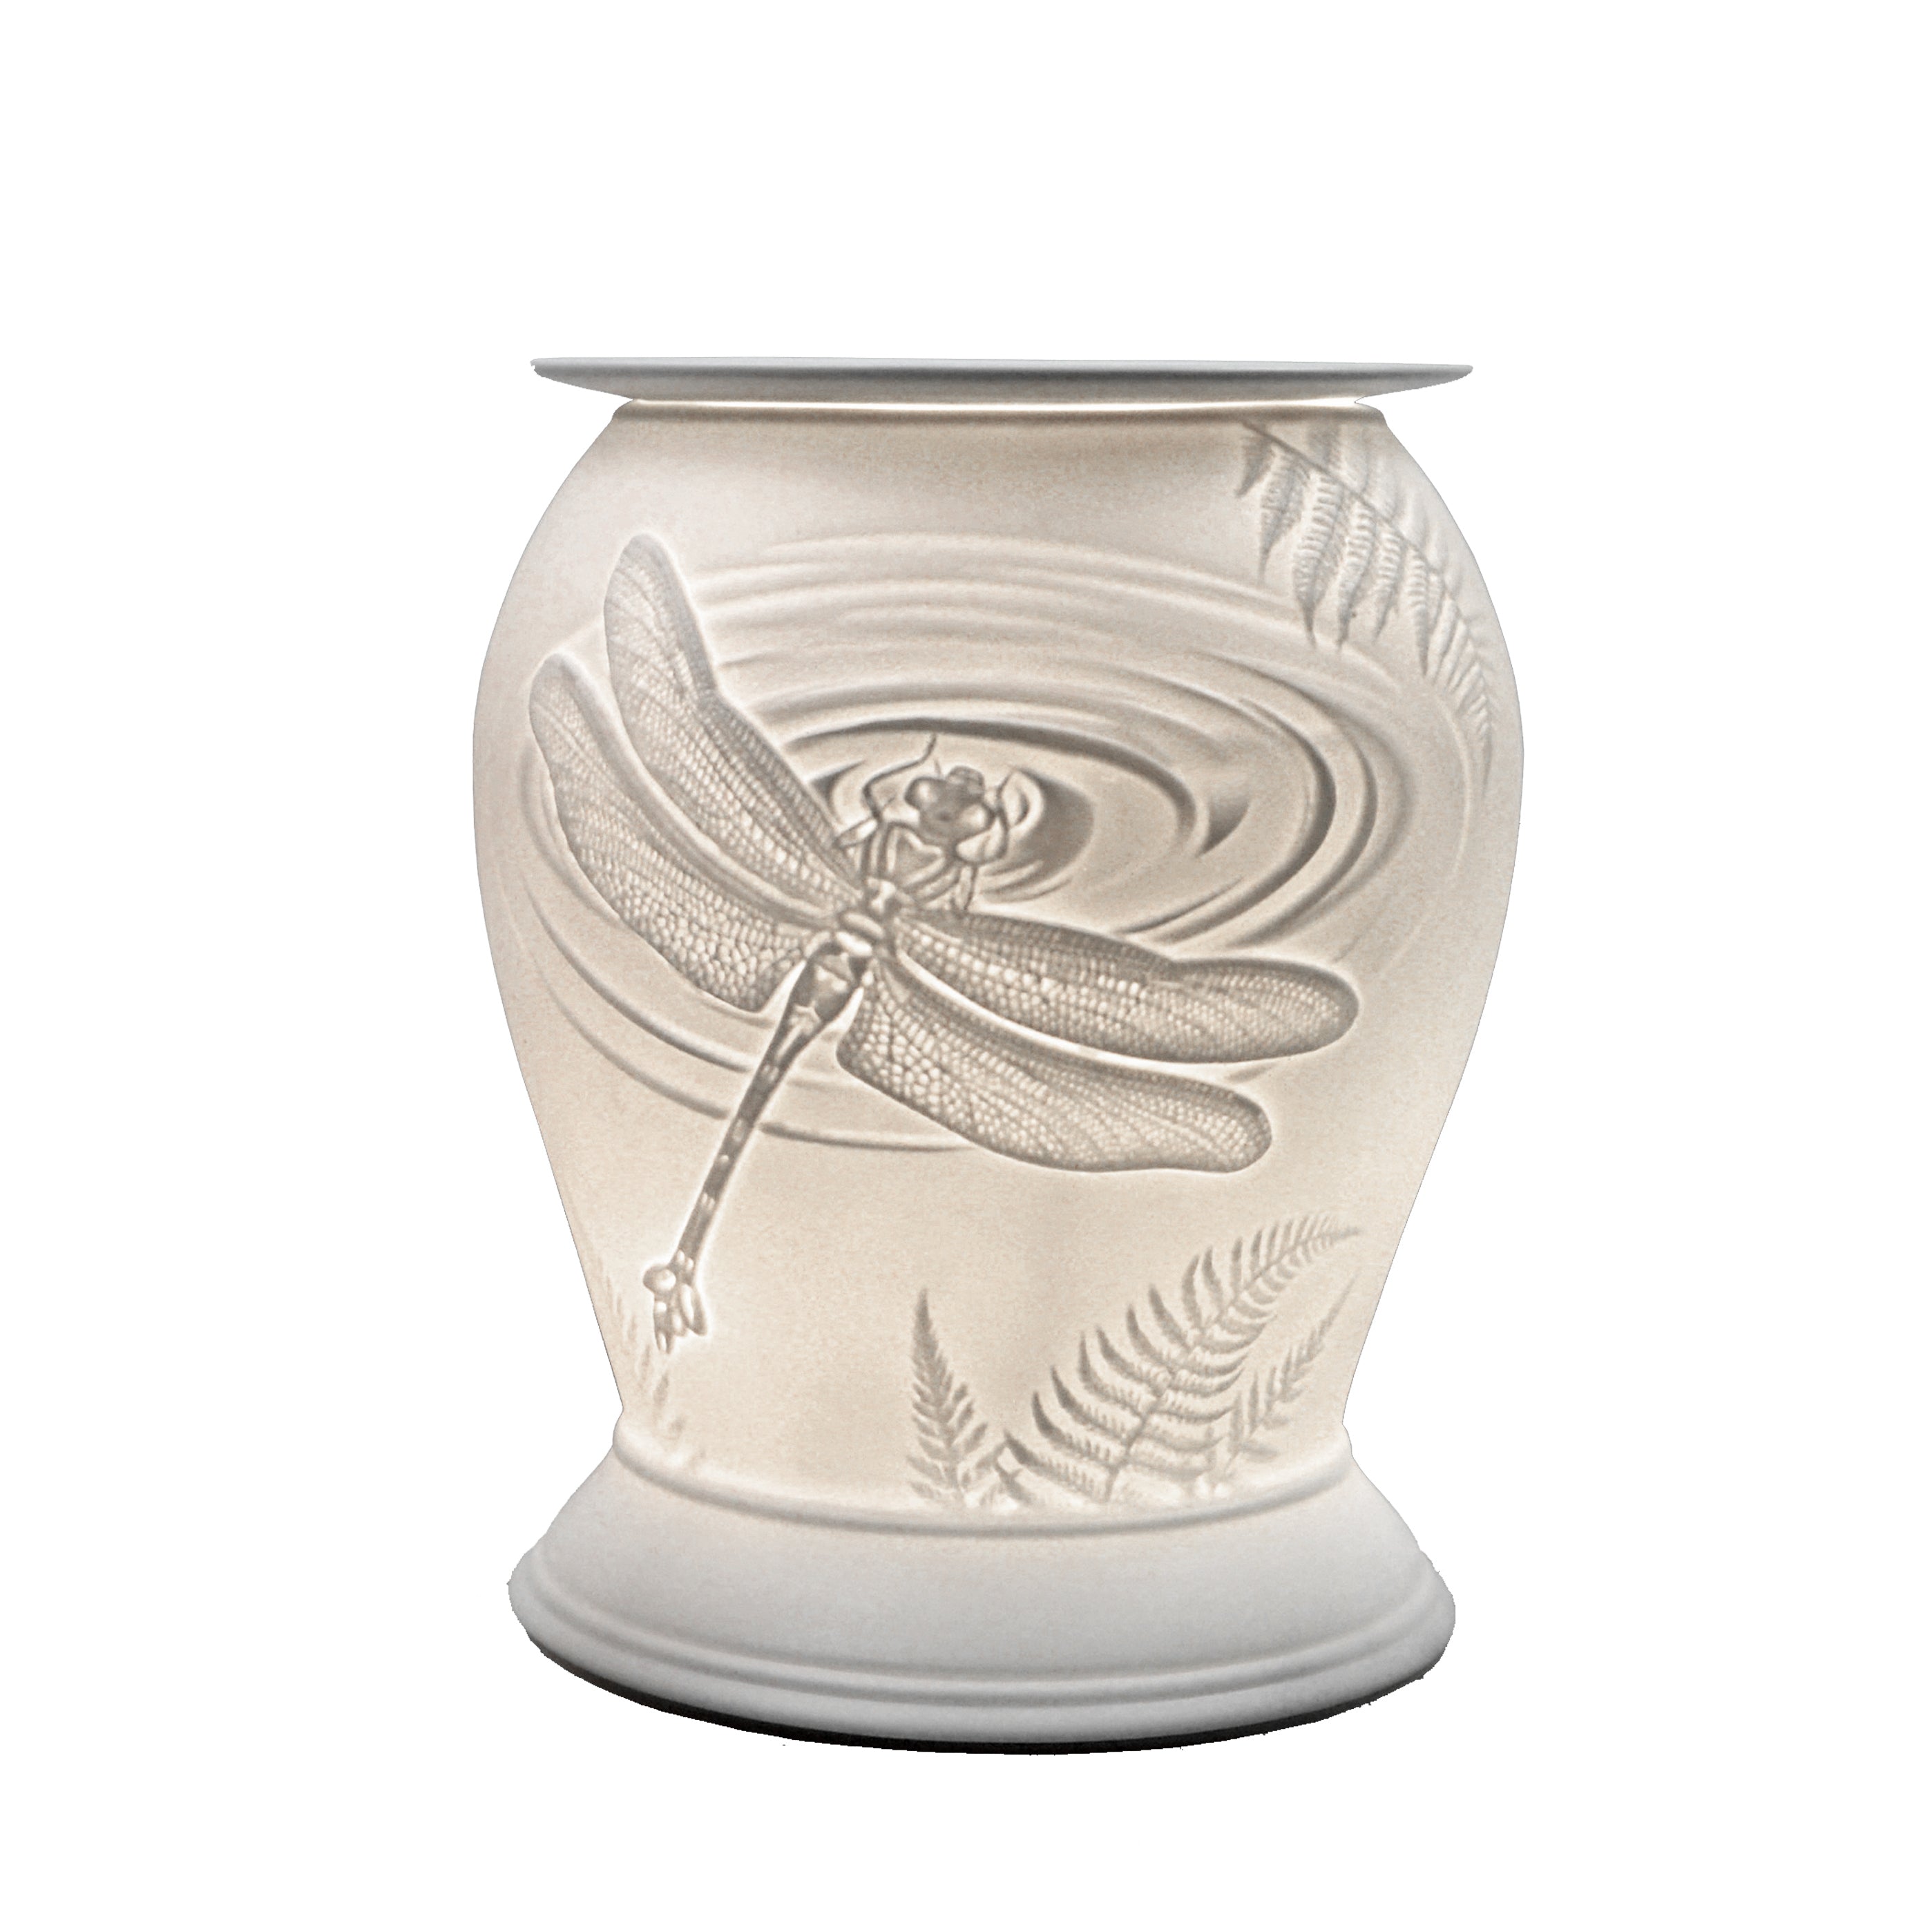 The porcelain material on this Wax Melt Burner allows bright light to shine through it, providing the opportunity to create this breathtaking Nature design. This is done by crafting images out of thicker and thinner sections of the porcelain, allowing for detailed shadowing and a 3D effect. The porcelains elegant look will fit perfectly in any room is available in a range of designs and two different shapes.